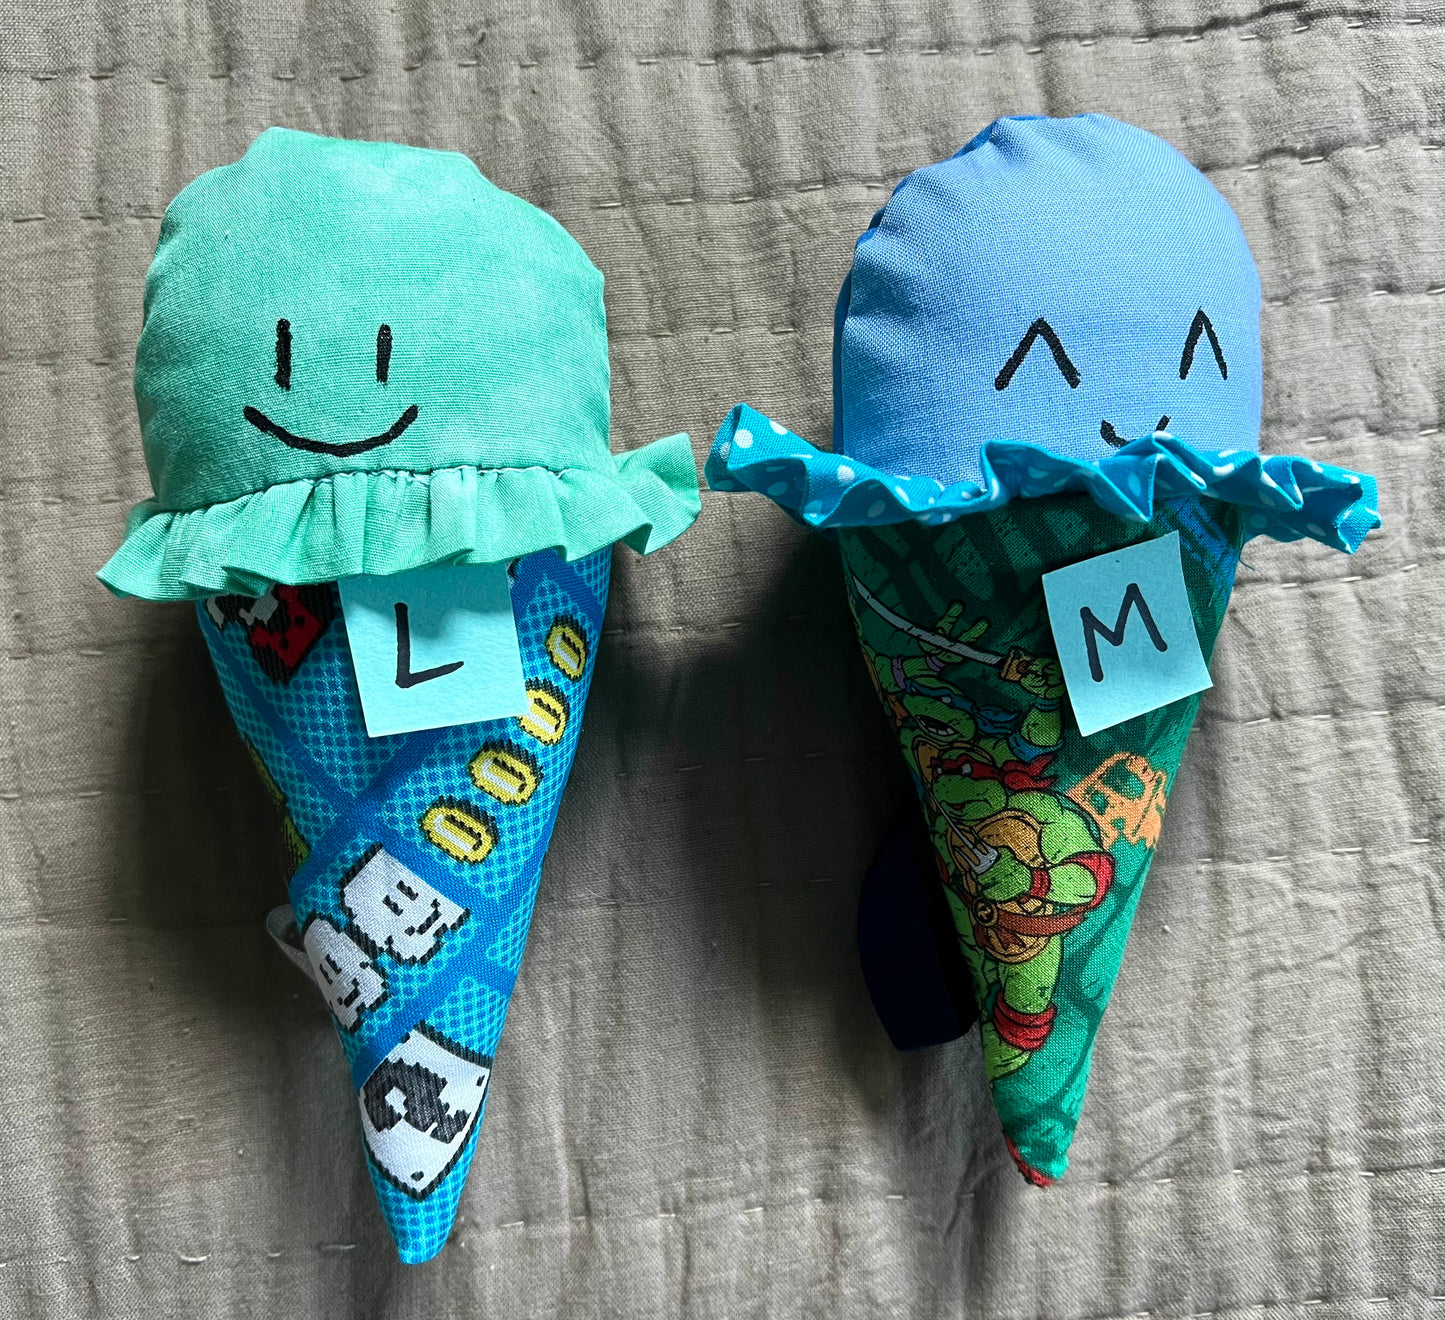 Ice cream cone plushies with handpainted faces, lined up with the letters L M below them